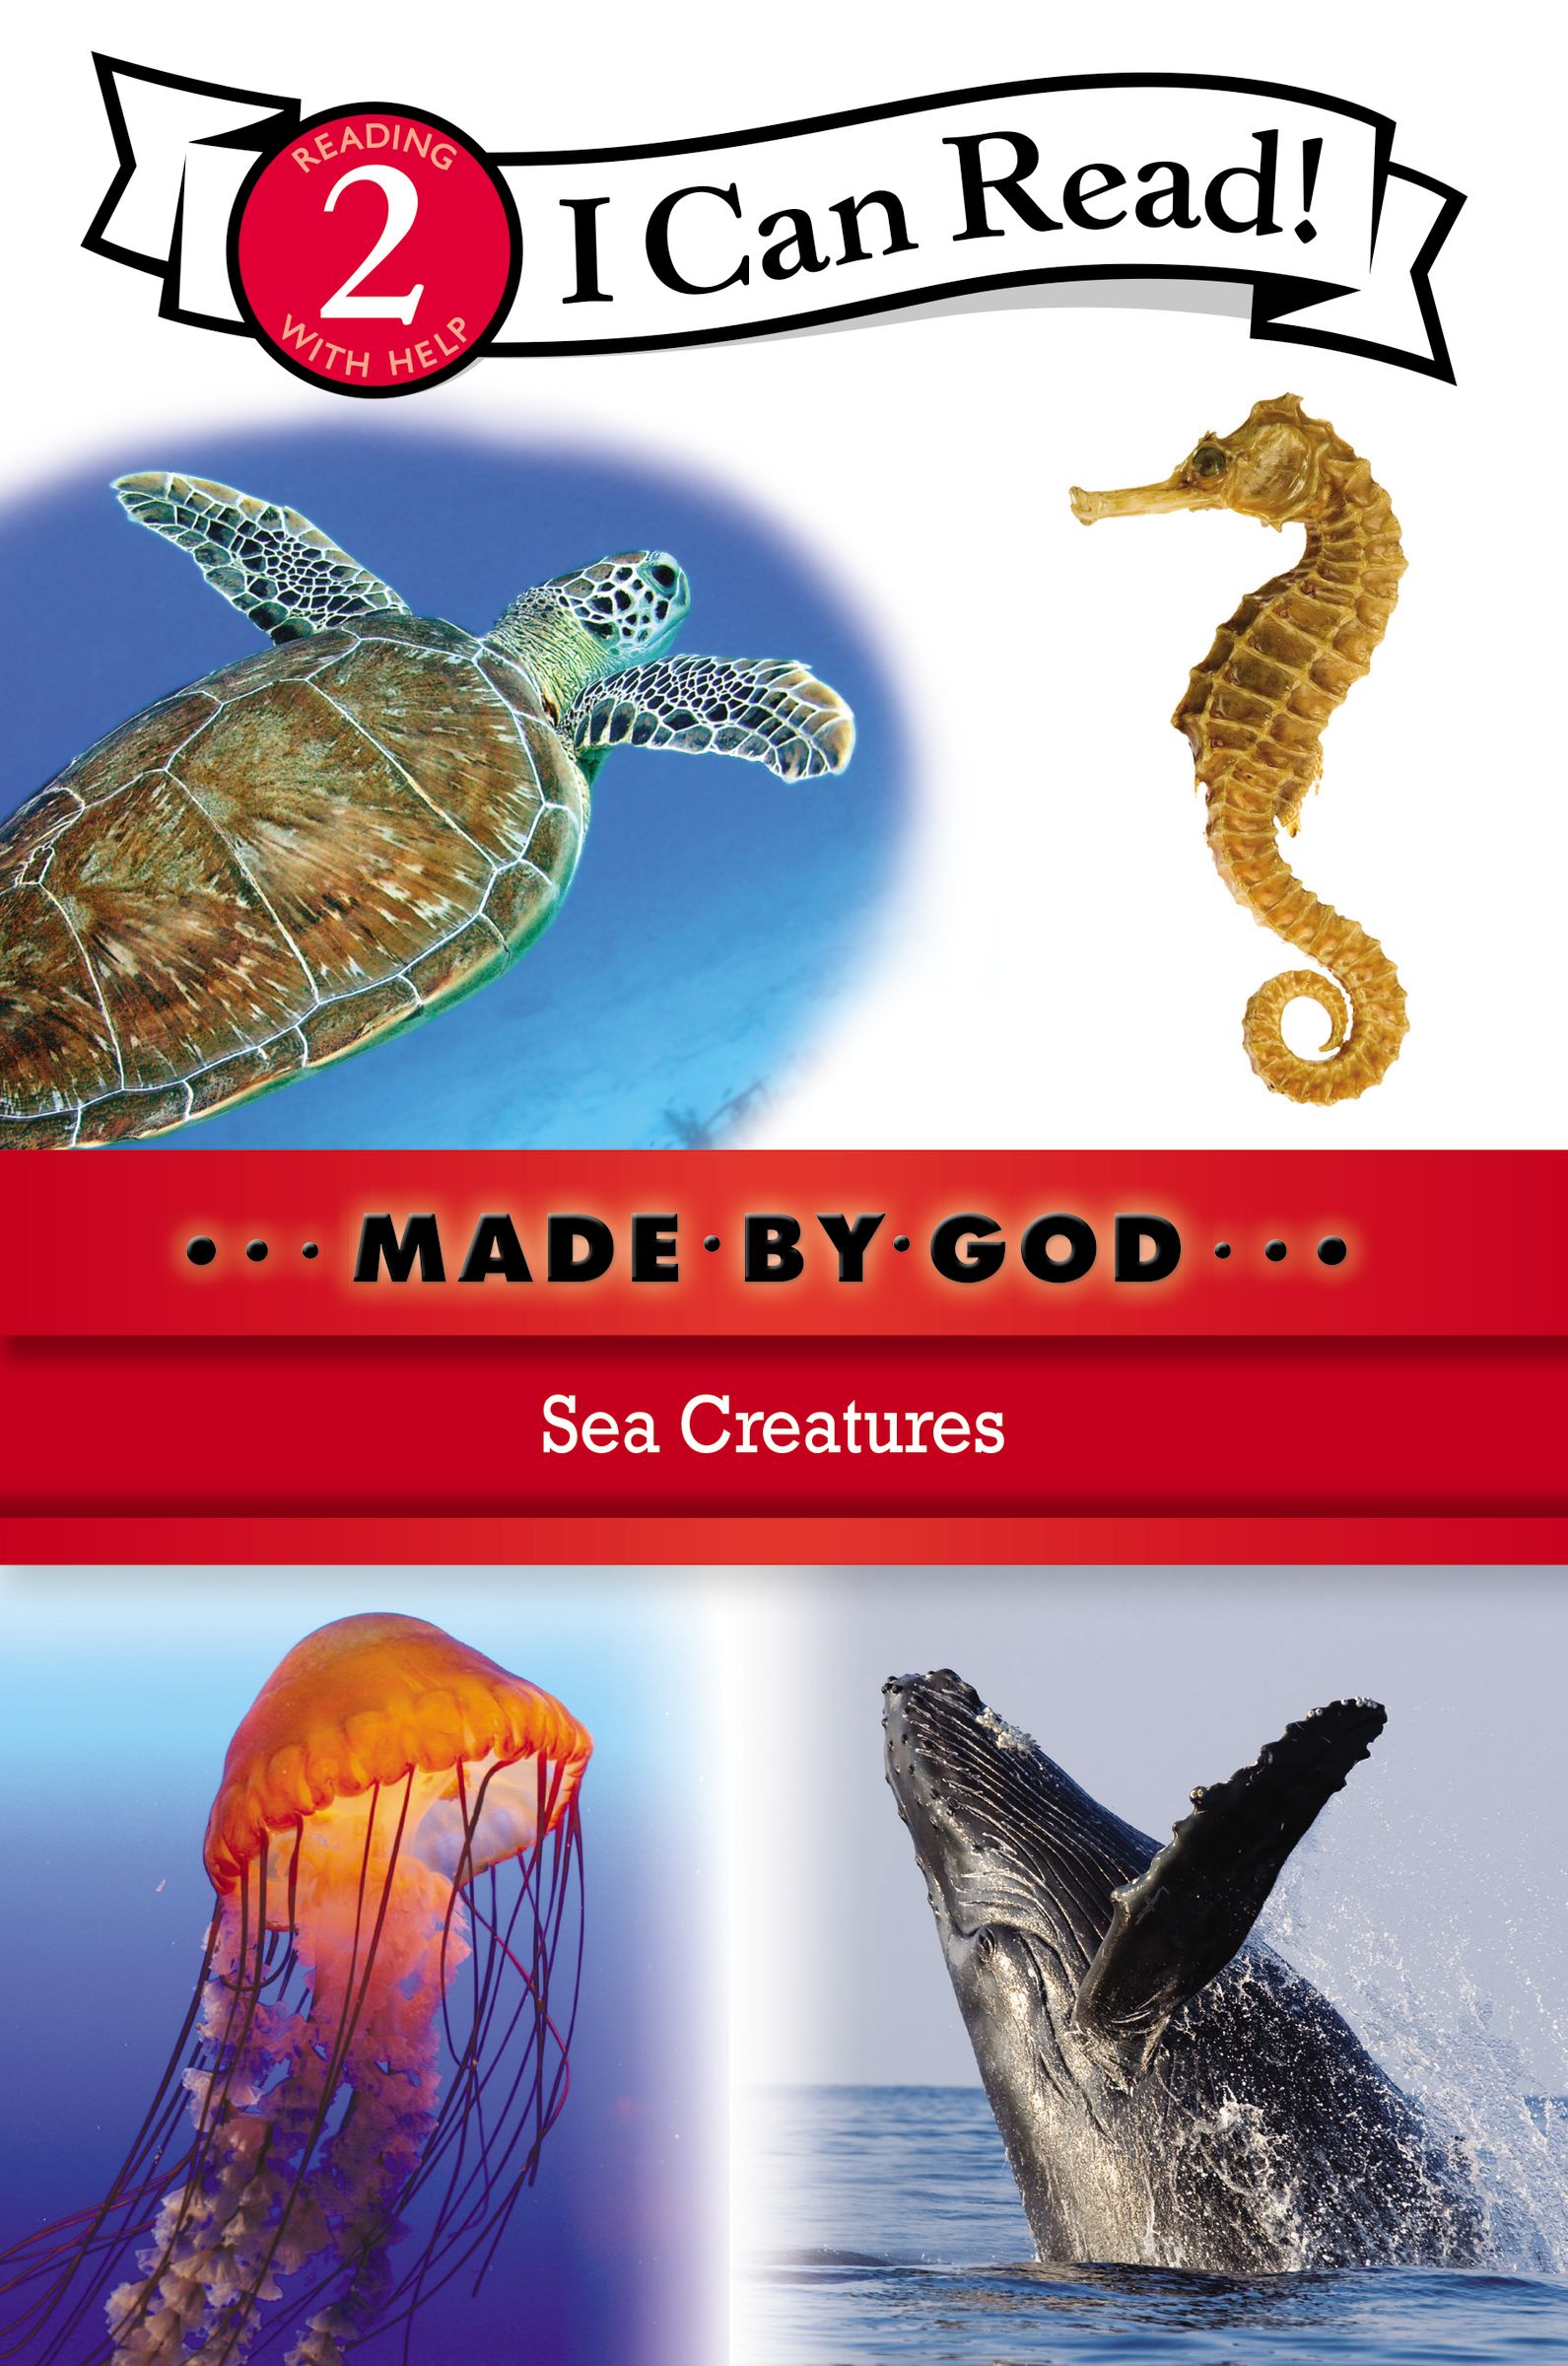 sea-creatures-free-delivery-when-you-spend-10-at-eden-co-uk